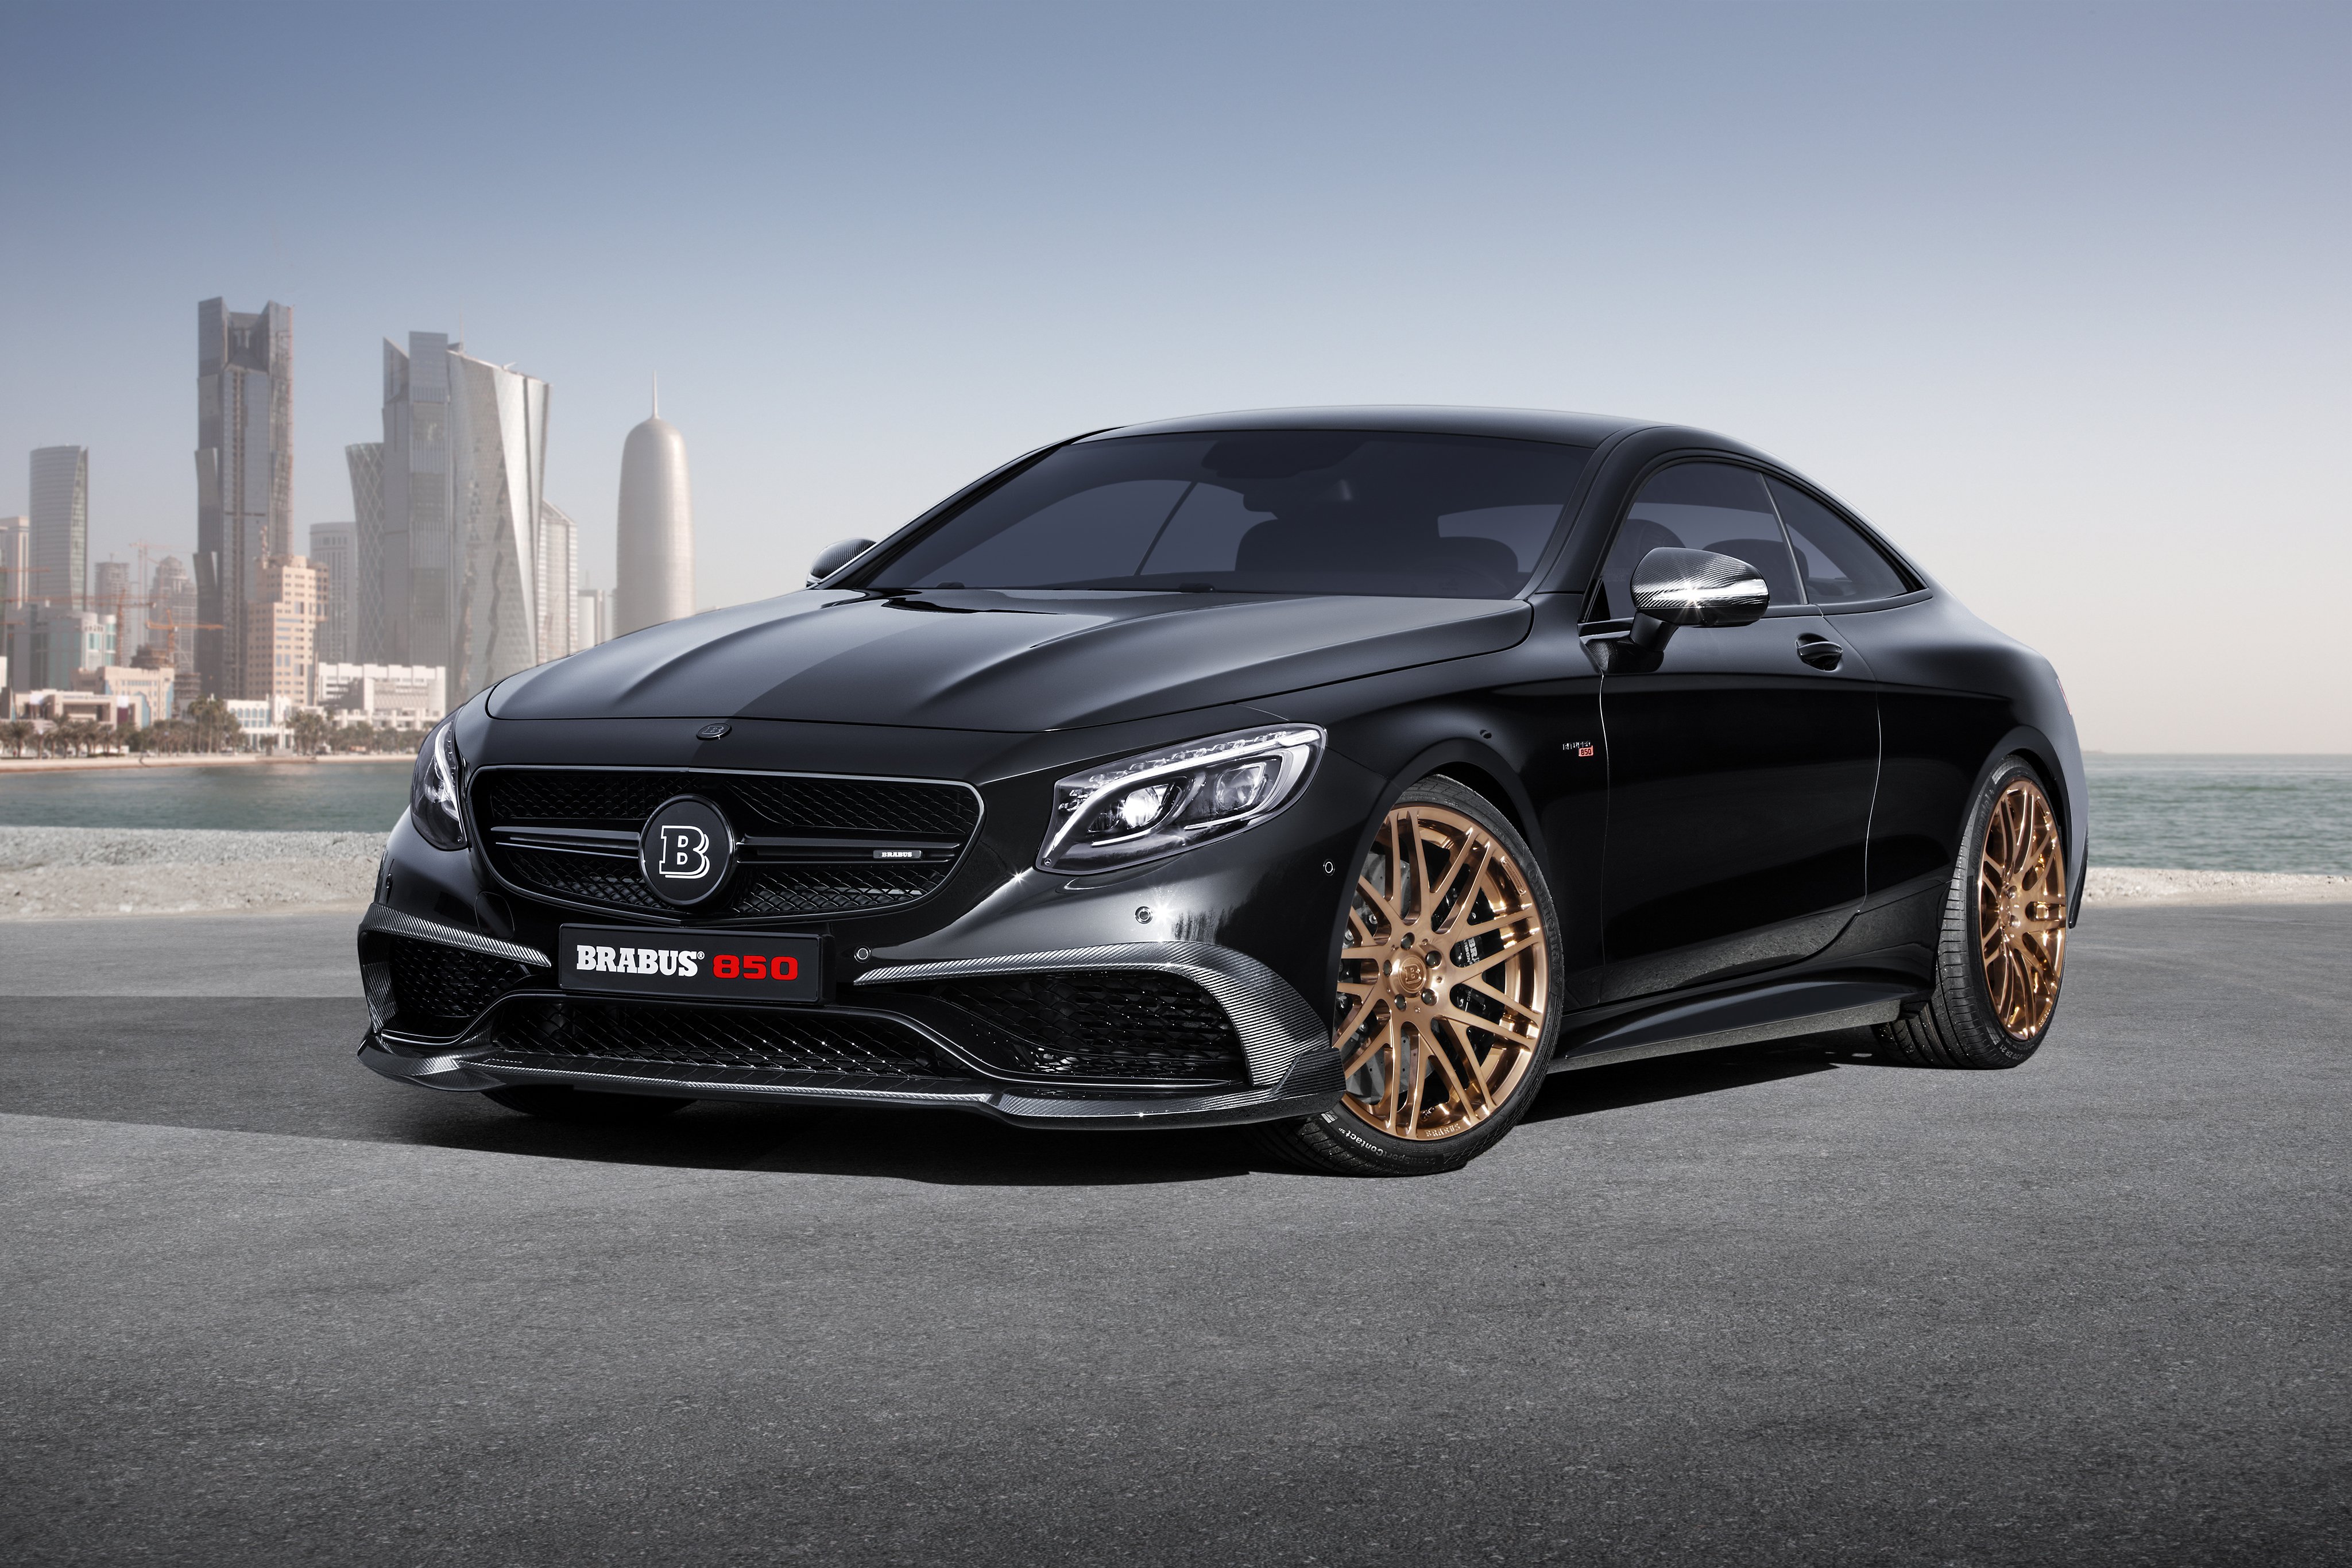 2015, Brabus, Mercedes, Benz, S63, Amg, Coupe, C217, Tuning Wallpaper